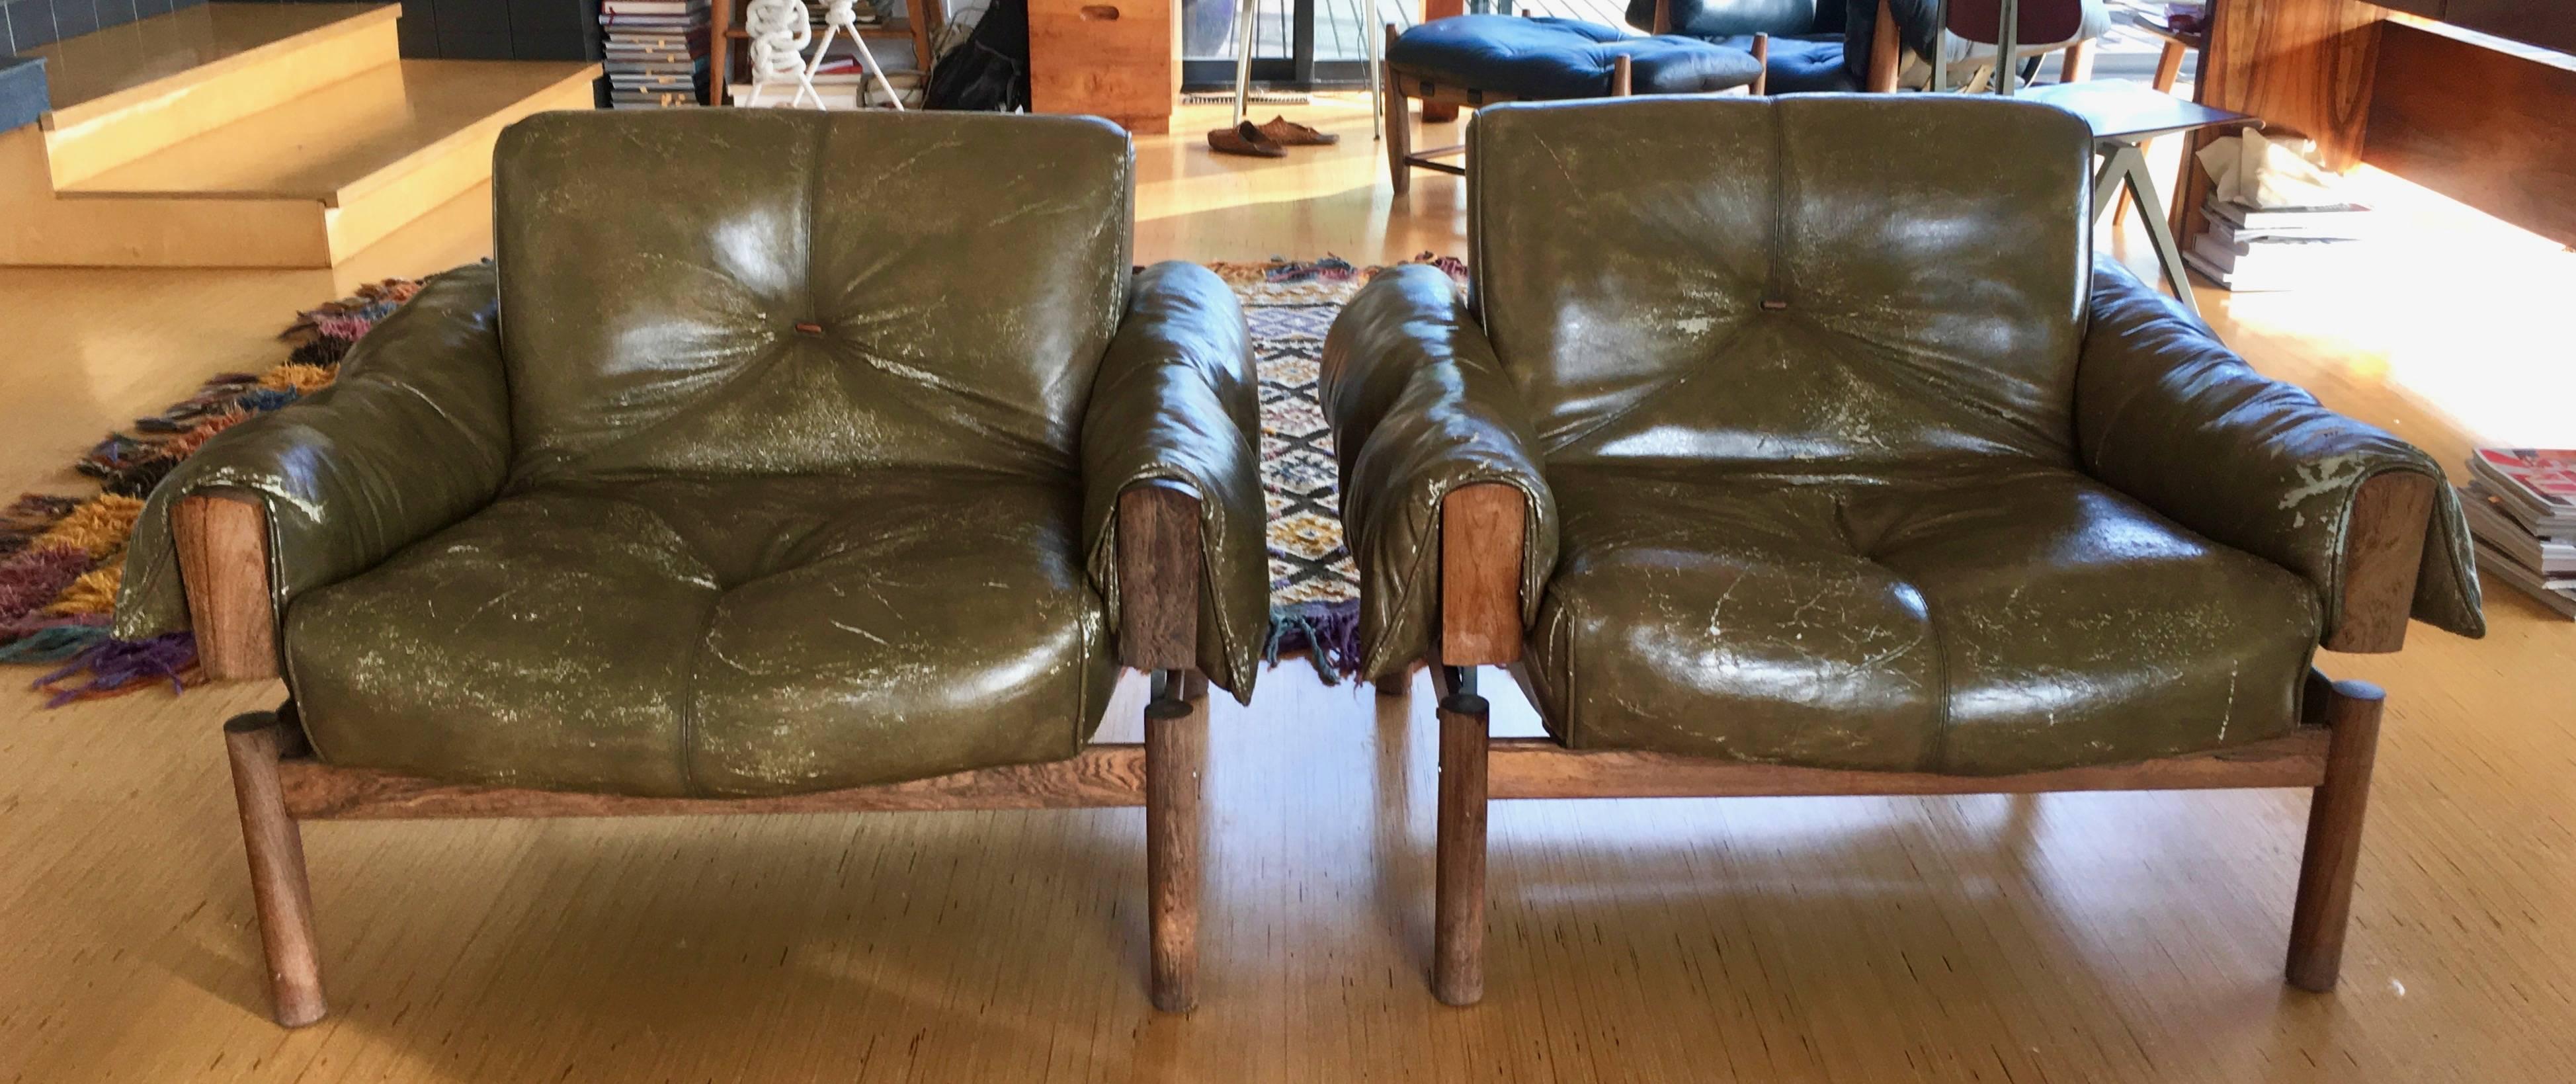 Beautifully worn Italian leather lounge chairs ready for your home or office. Sure to provide comfort and relaxation to any busy schedule.

Patinated to perfection to provide a relax vintage look.